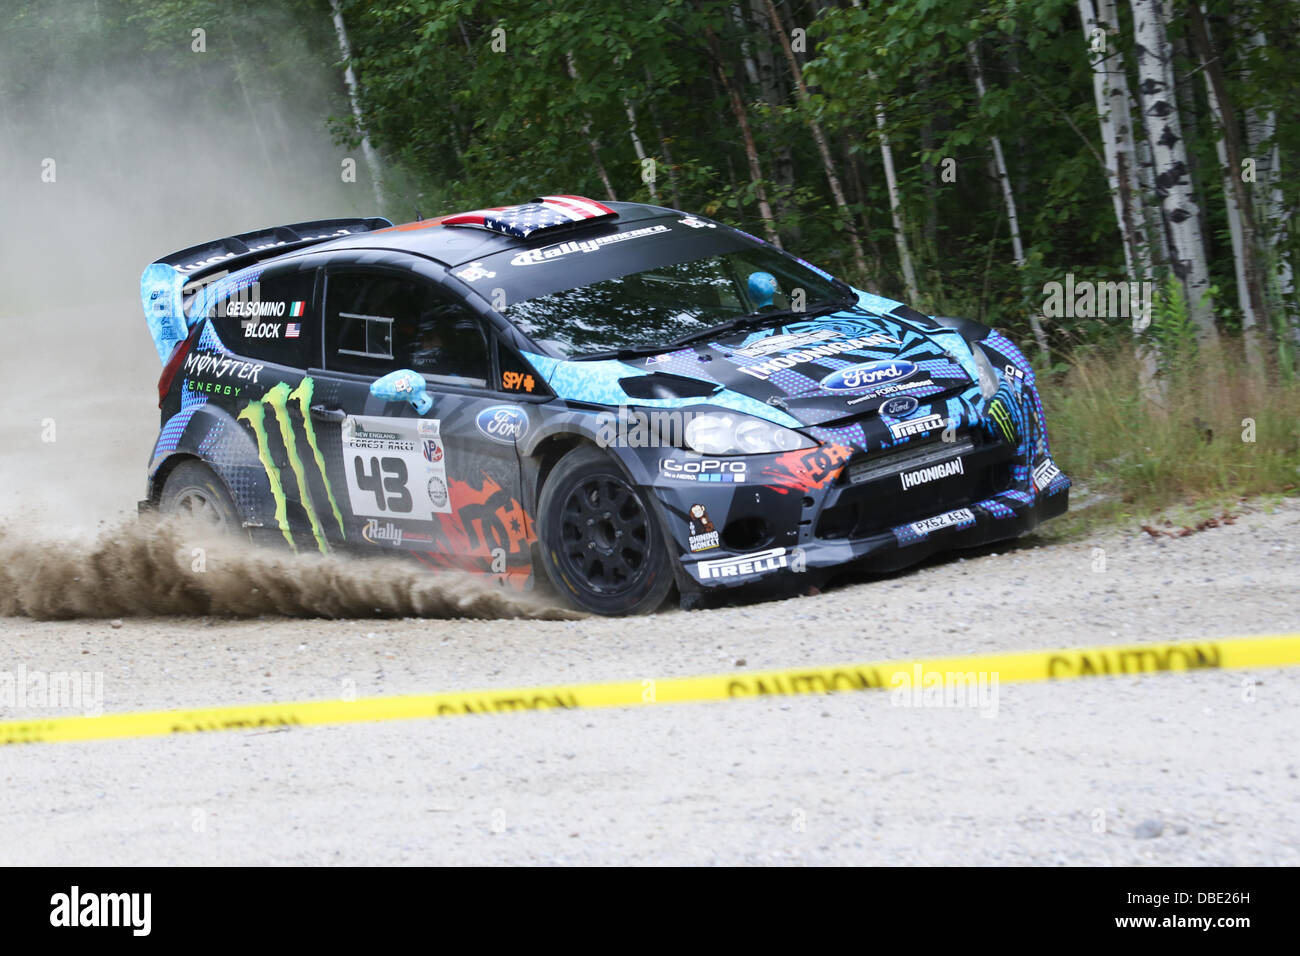 Newry, Maine, USA. 26th July, 2013. Hoonigan Racing's Ken Block and Alex Gelsomino hit the second stage in the New England Forest Rally. Hoonigan Racing's Ken Block and Alex Gelsomino won their first New England Forest Rally (NEFR) on Saturday by 6.5 seconds faster than Subaru Rally Team USA's David Higgins and Craig Drew in the Rally American National Championship event at Newry, Maine. © Nicolaus Czarnecki/ZUMAPRESS.com/Alamy Live News Stock Photo